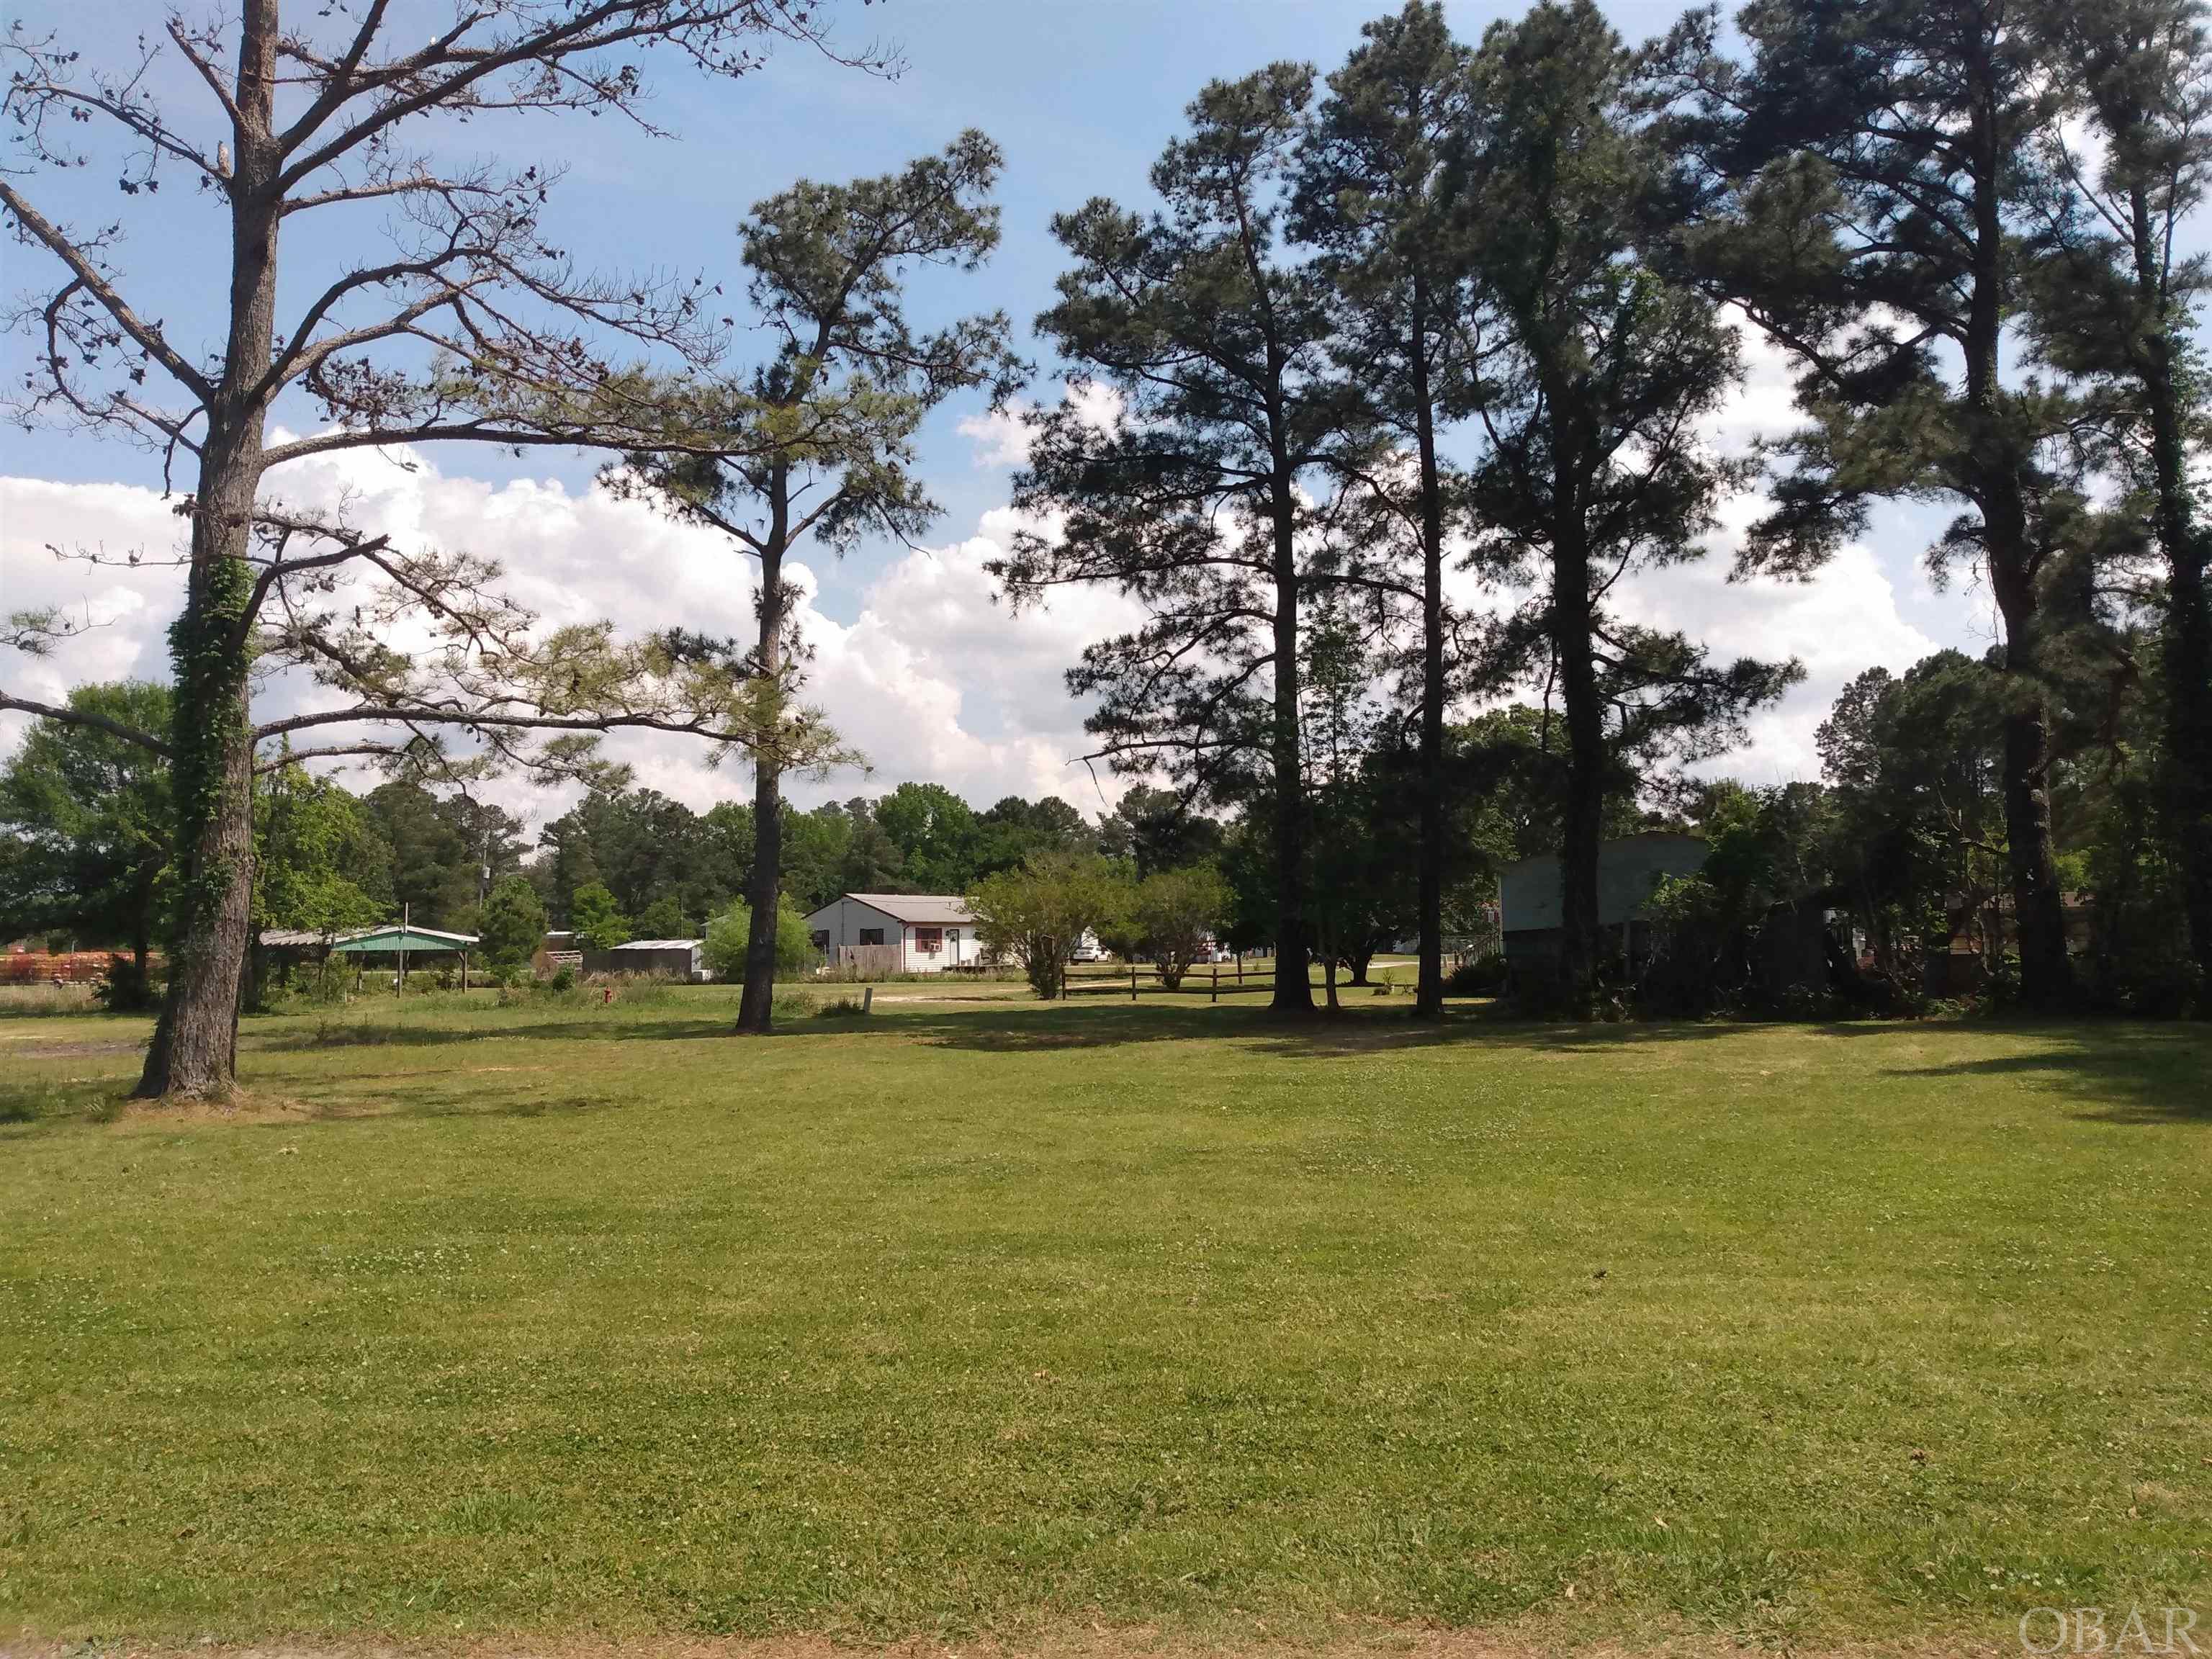 Cleared one- third acre vacant lot at "Taylors Beach," in Tyrrell County, N.C. No restrictions. Seller has a membership in the "Taylor Beach Club" of which the membership may be transferable to the buyer. The membership allows access to the club boat ramp, the pier extending into the Albemarle Sound and the beach house! Municipal water is available at the street and there is an existing septic system on the property. Low property taxes! Ideal property for a vacation home and entertaining family and guests! Offered at $30,000.